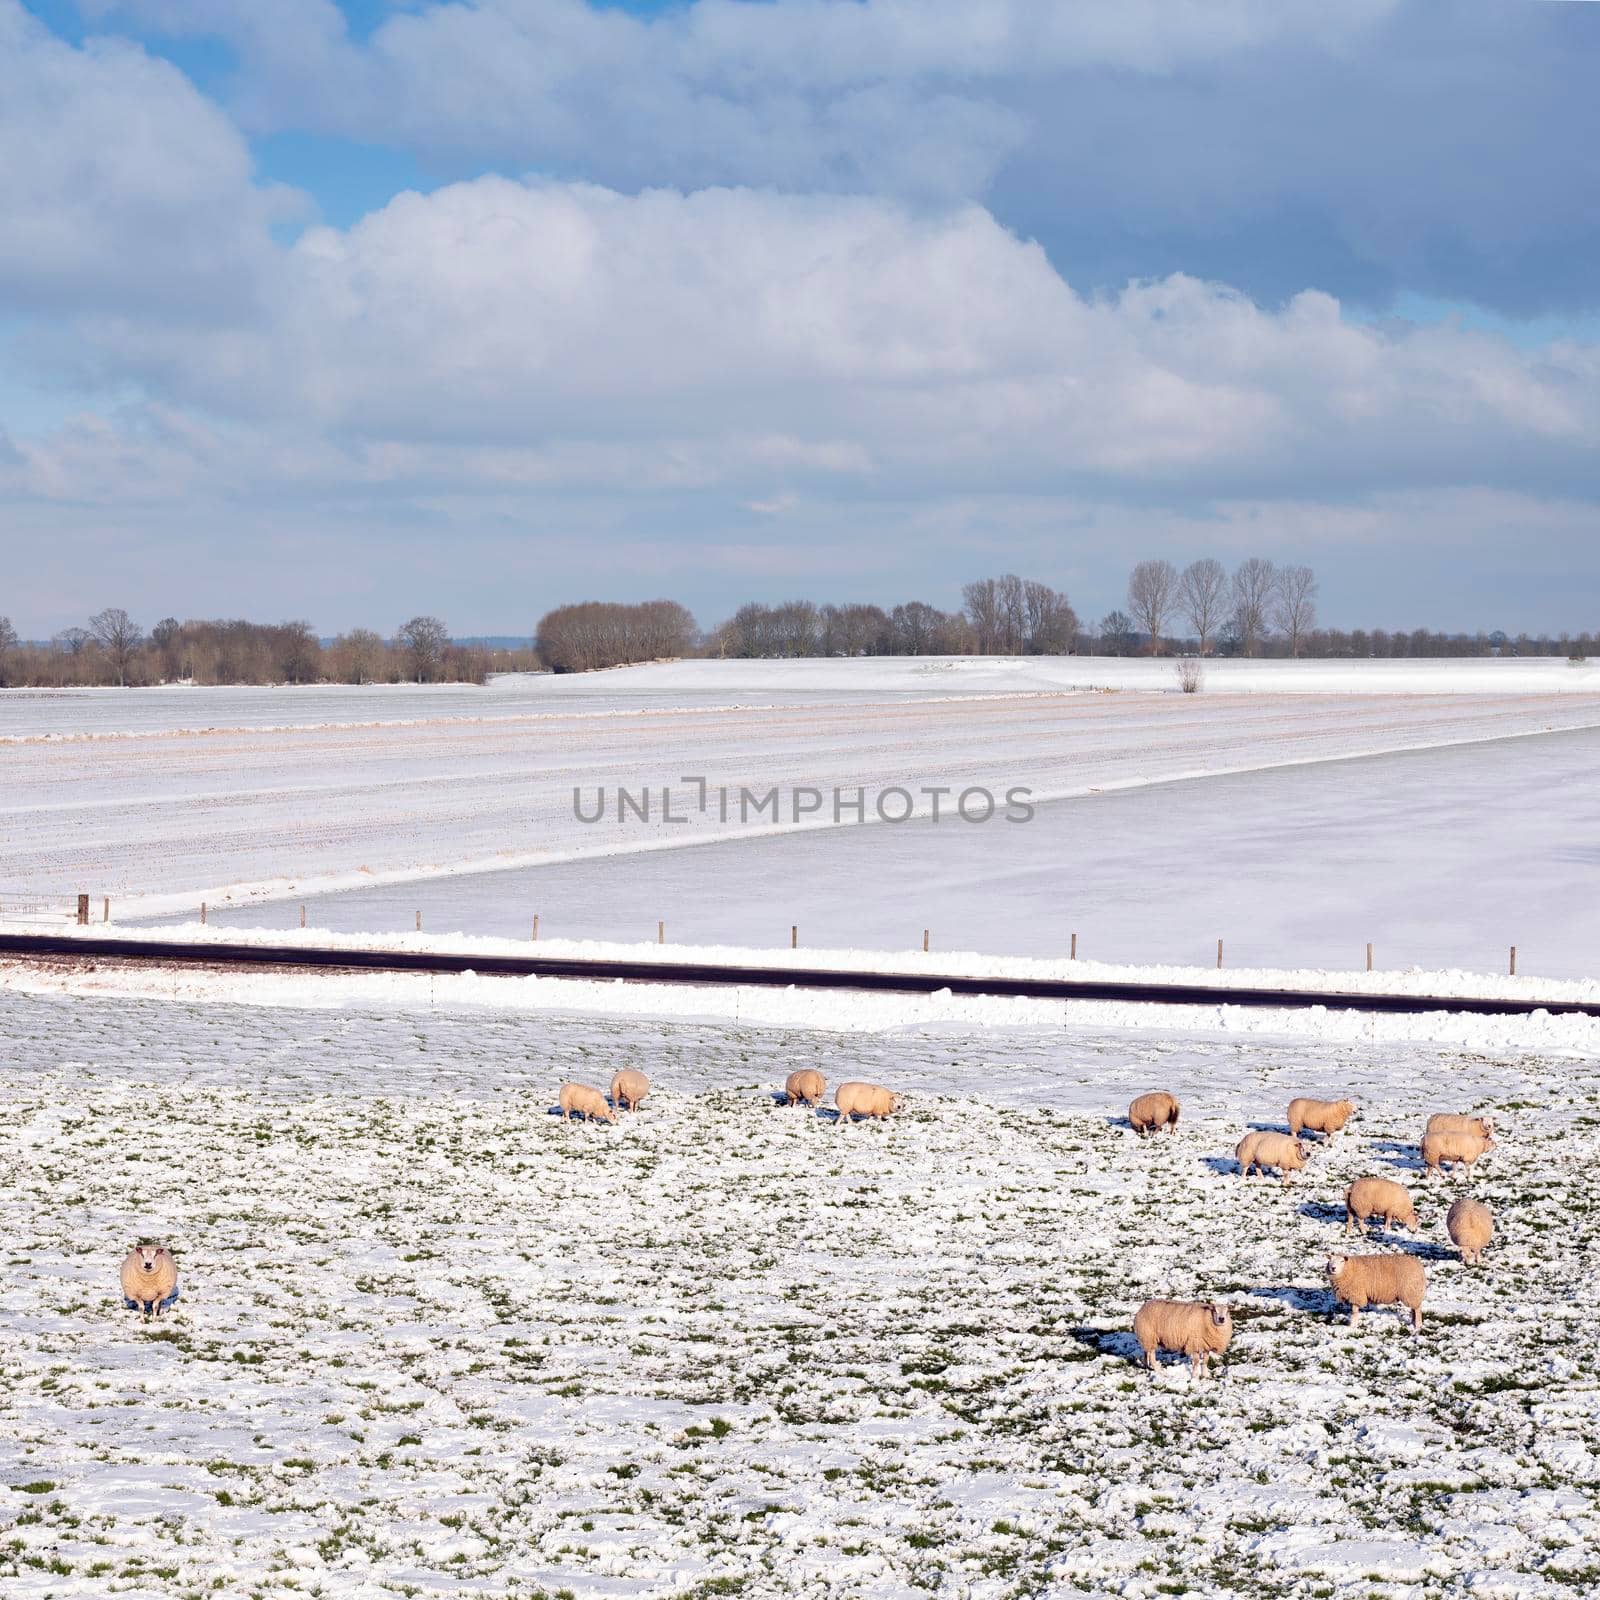 sheep in dutch meadow with snow and trees in the netherlands under blue sky and clouds